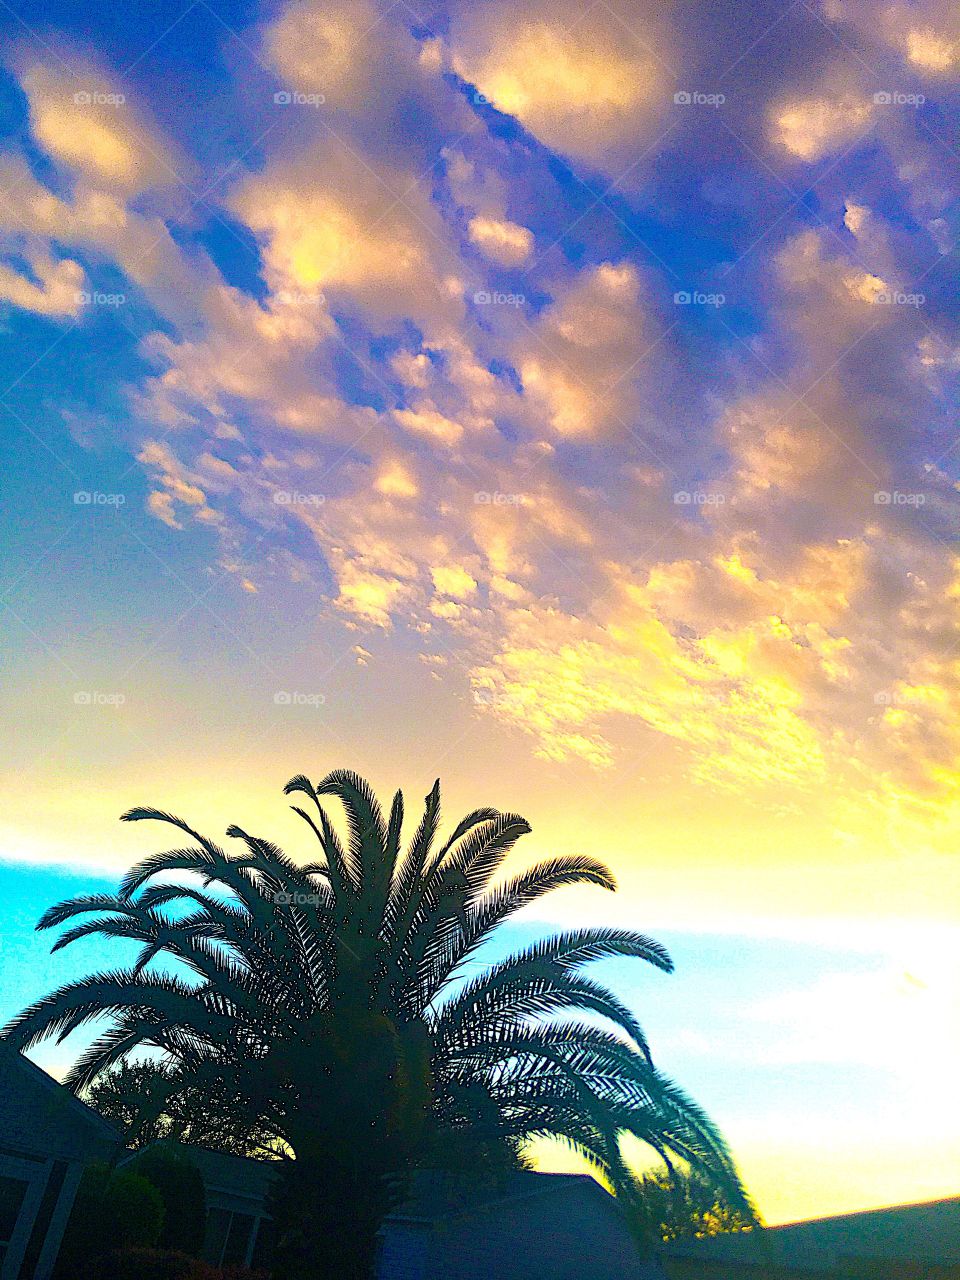 Silhouette palm tree against aqua blue Columbia blue, speckled sunlit clouds drifting overhead 